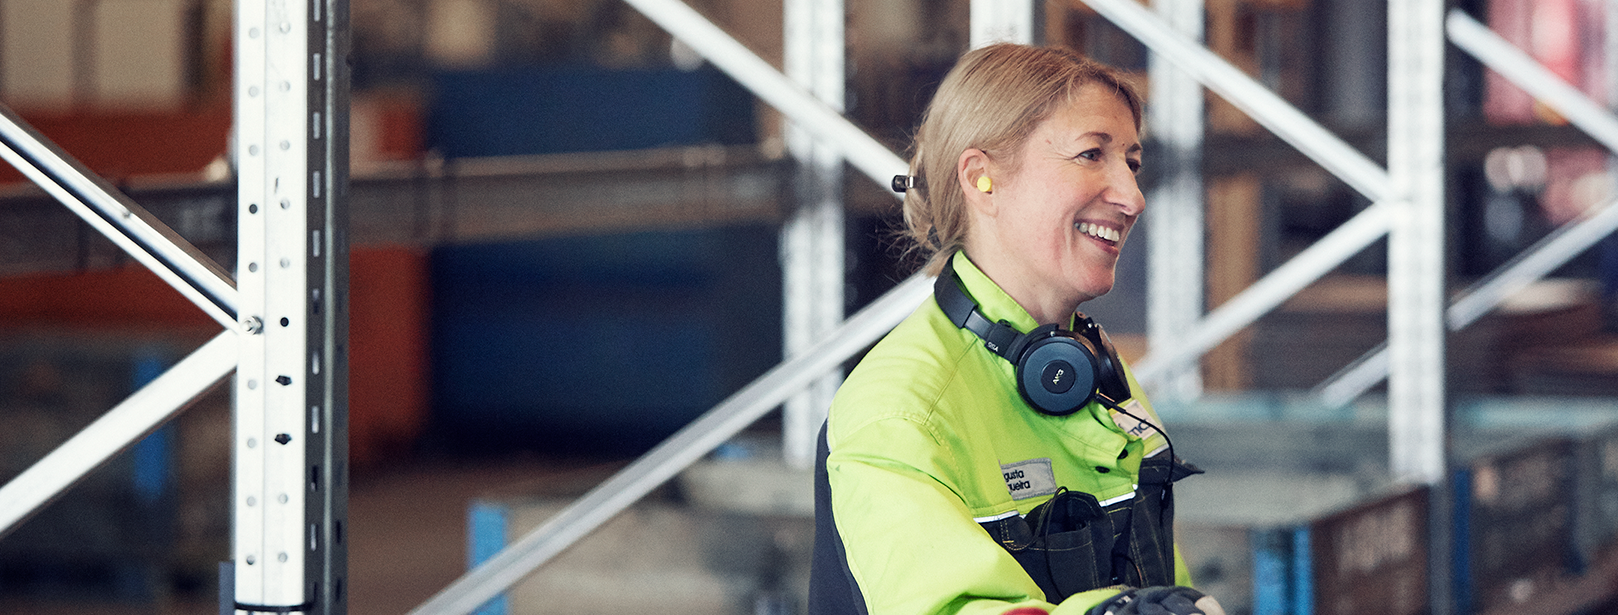 Arendal packing Gothenburg, DFDS employee woman expert, hero cropped